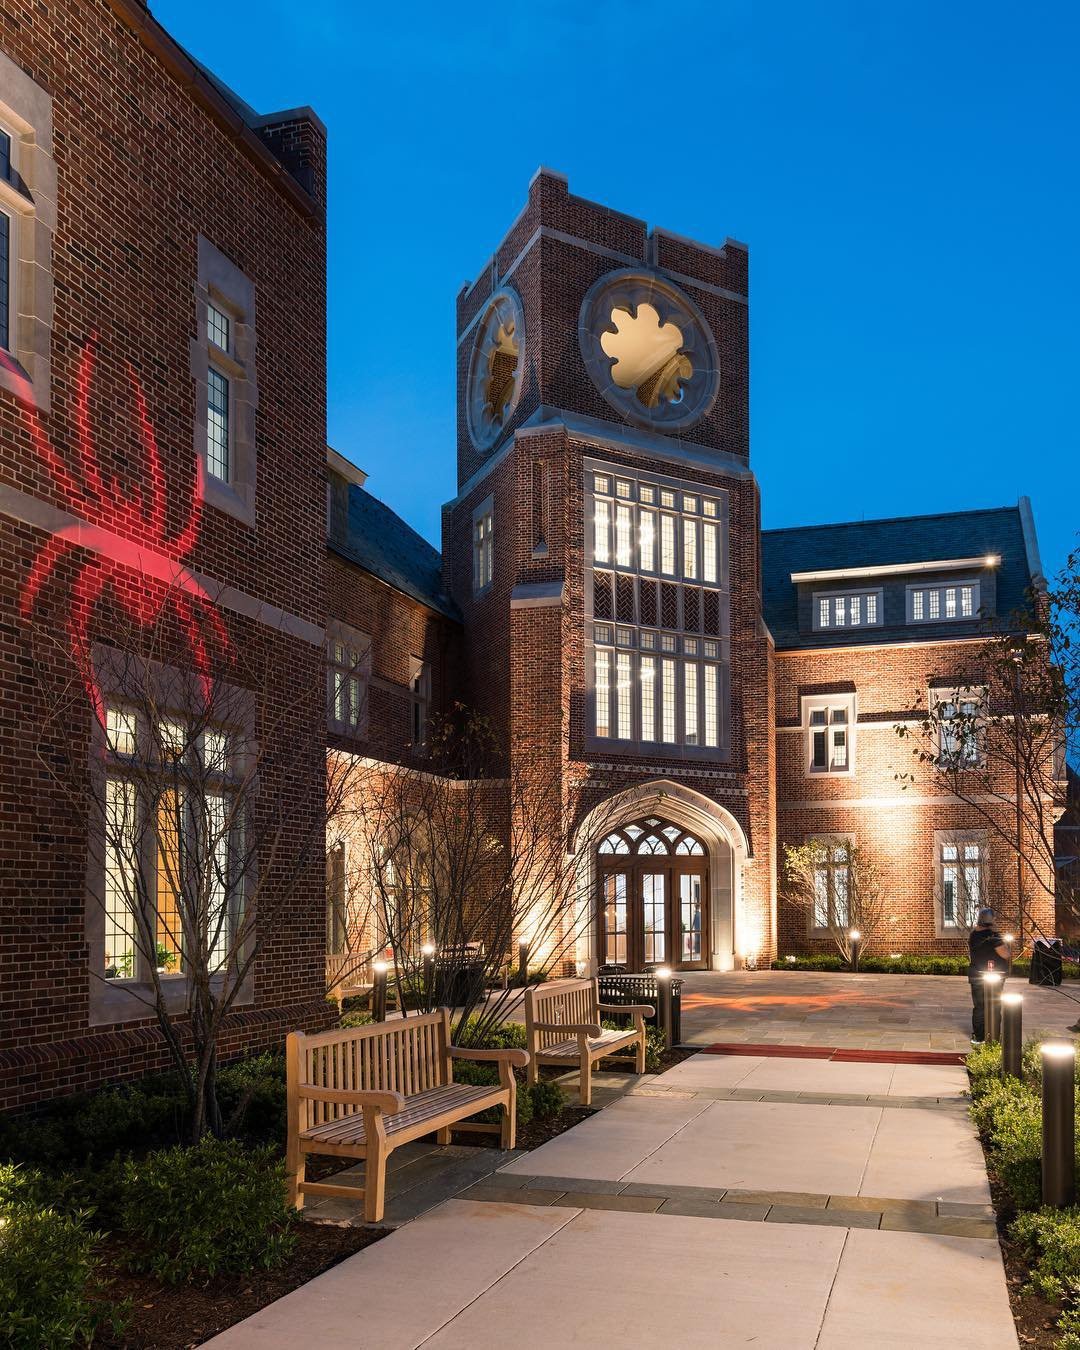 University of Richmond campus building at night with a spider logo